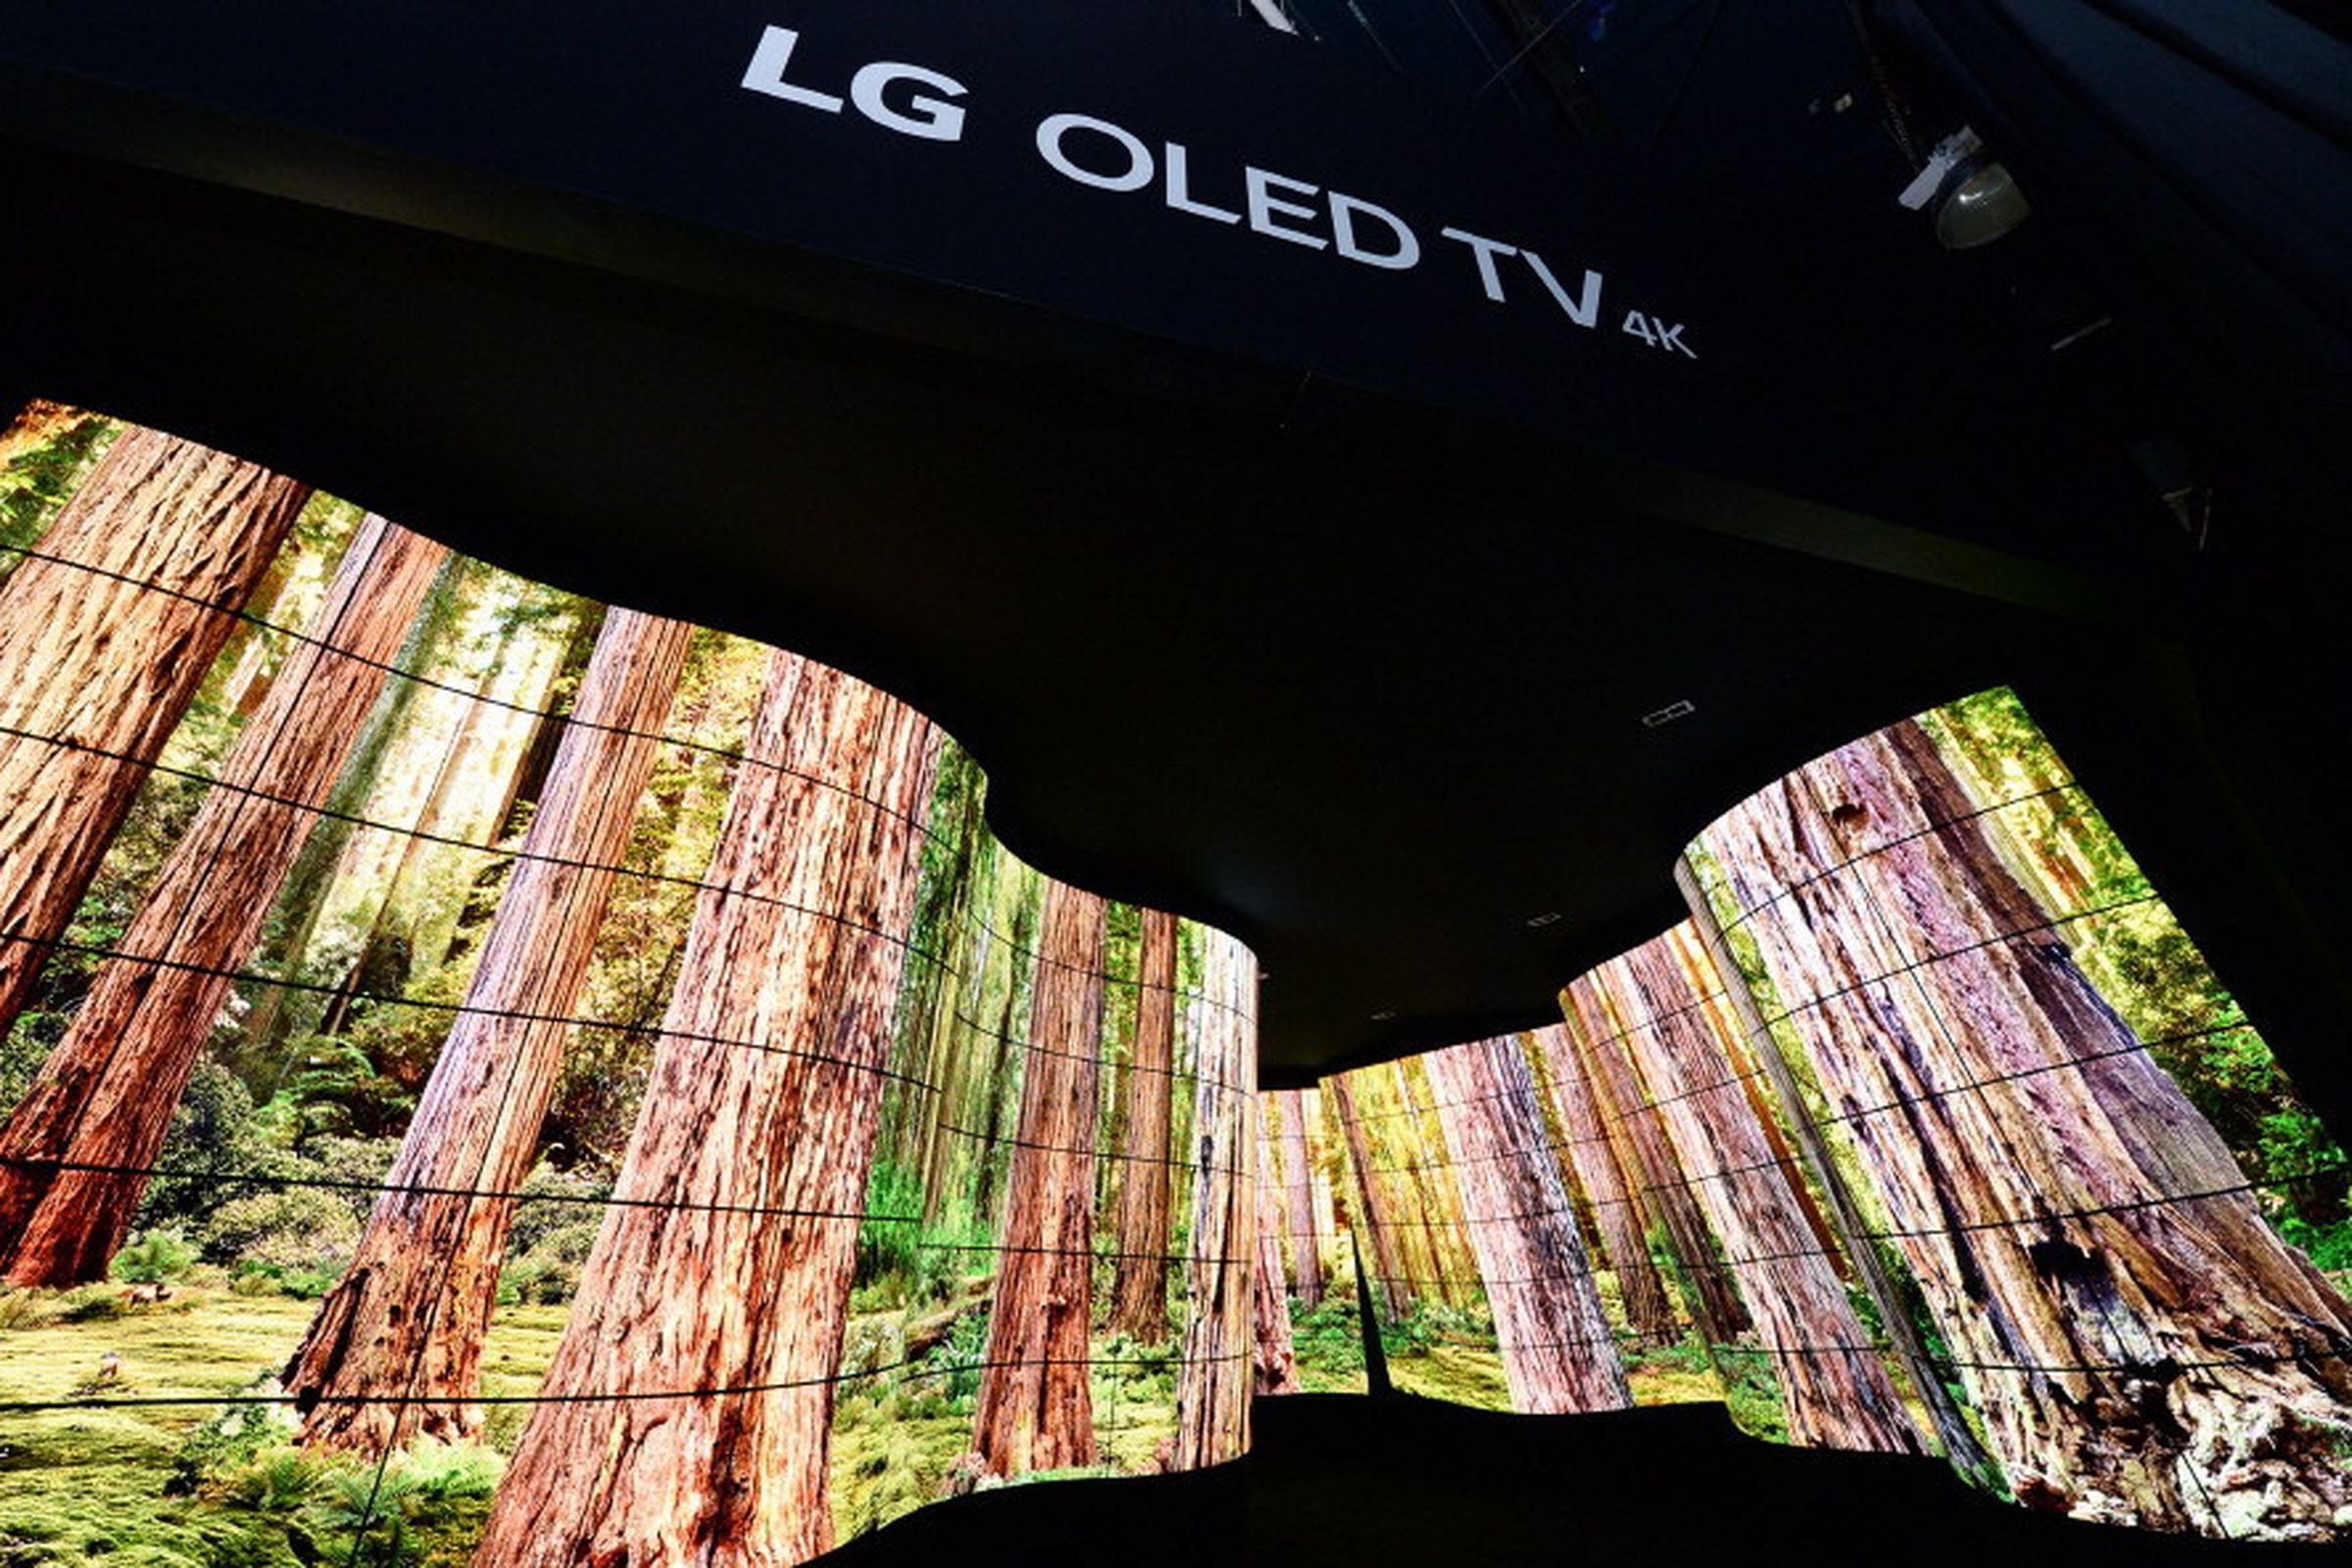 A huge wall of OLED displays from LG’s booth at CES 2018.